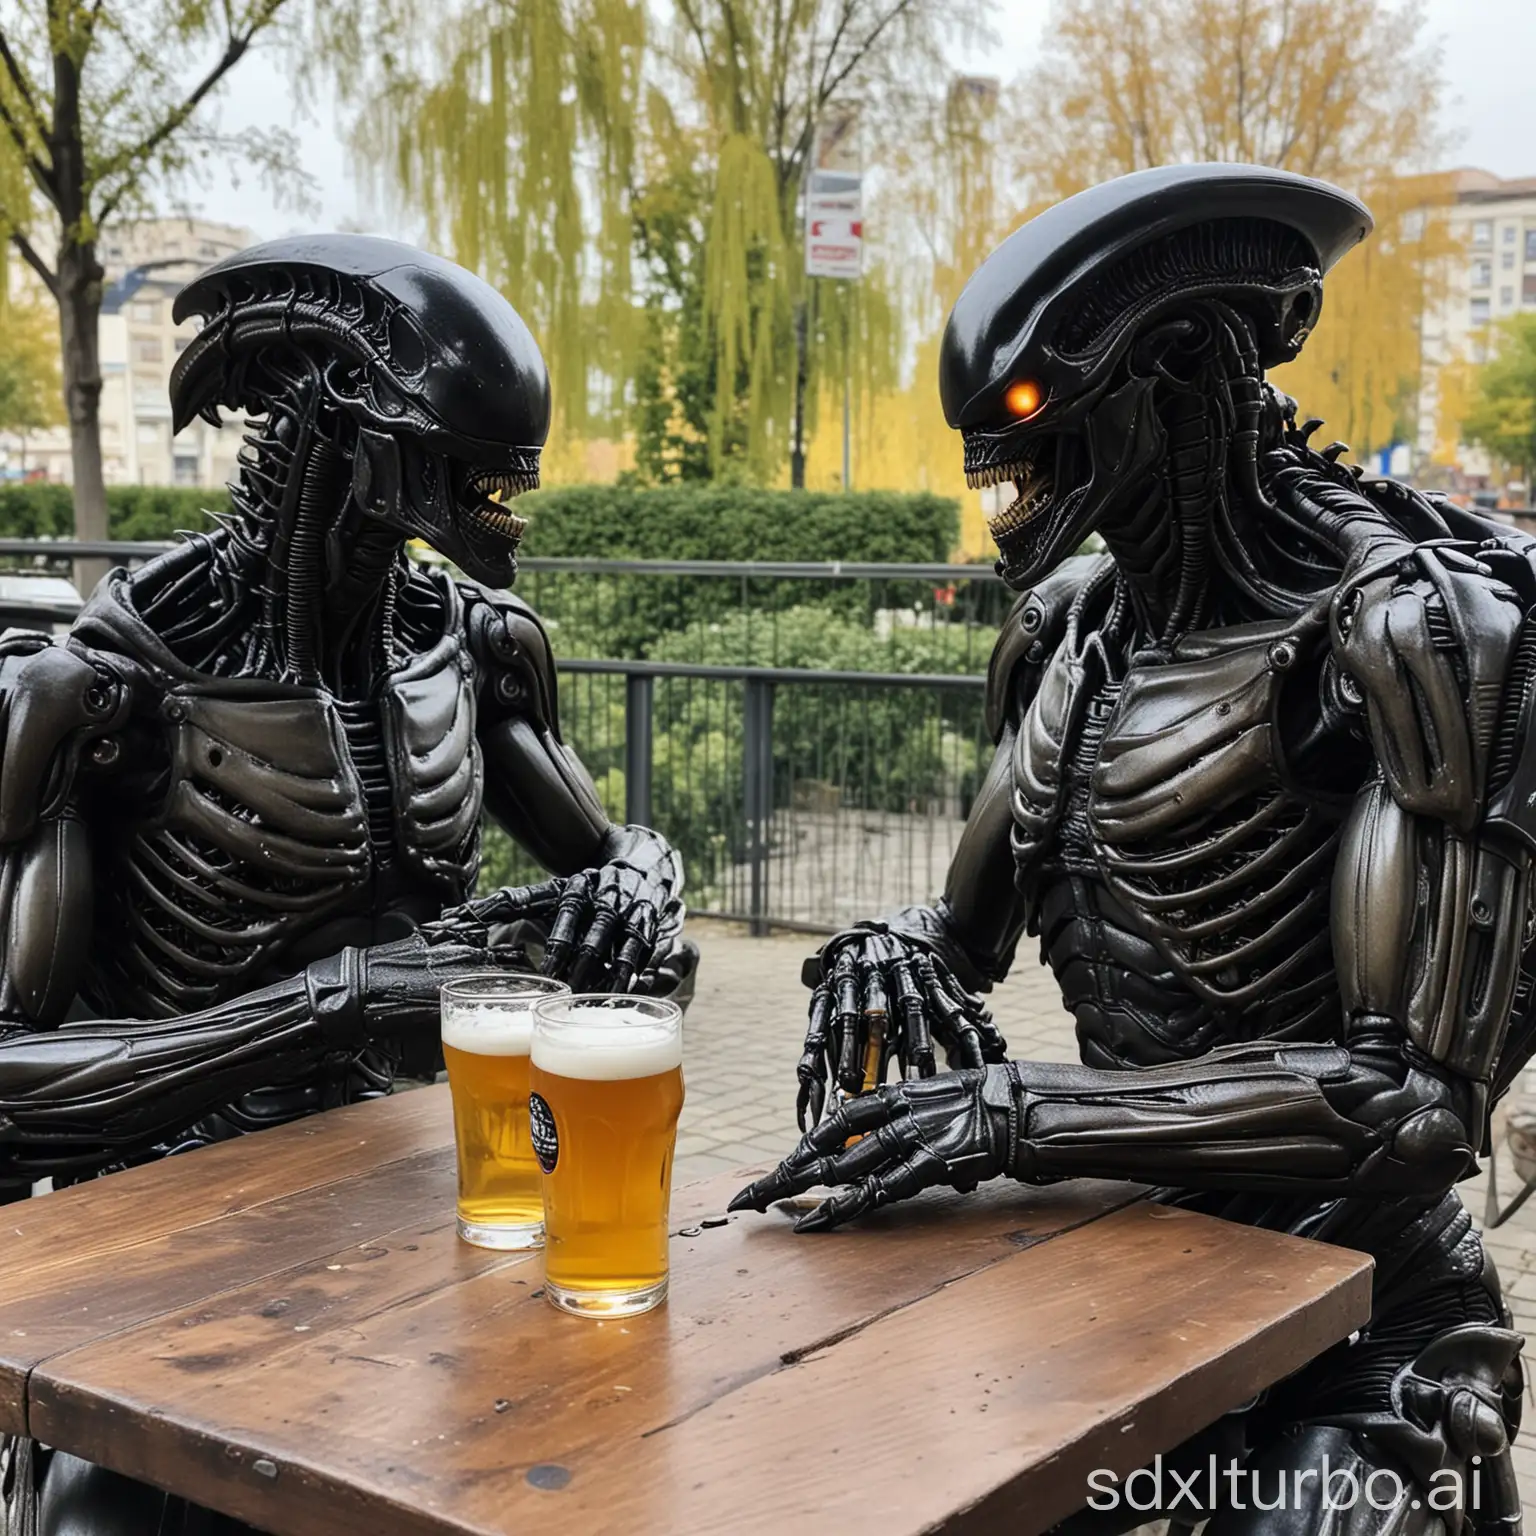 Real T800 and Xenomorph having a beer together in Bucharest